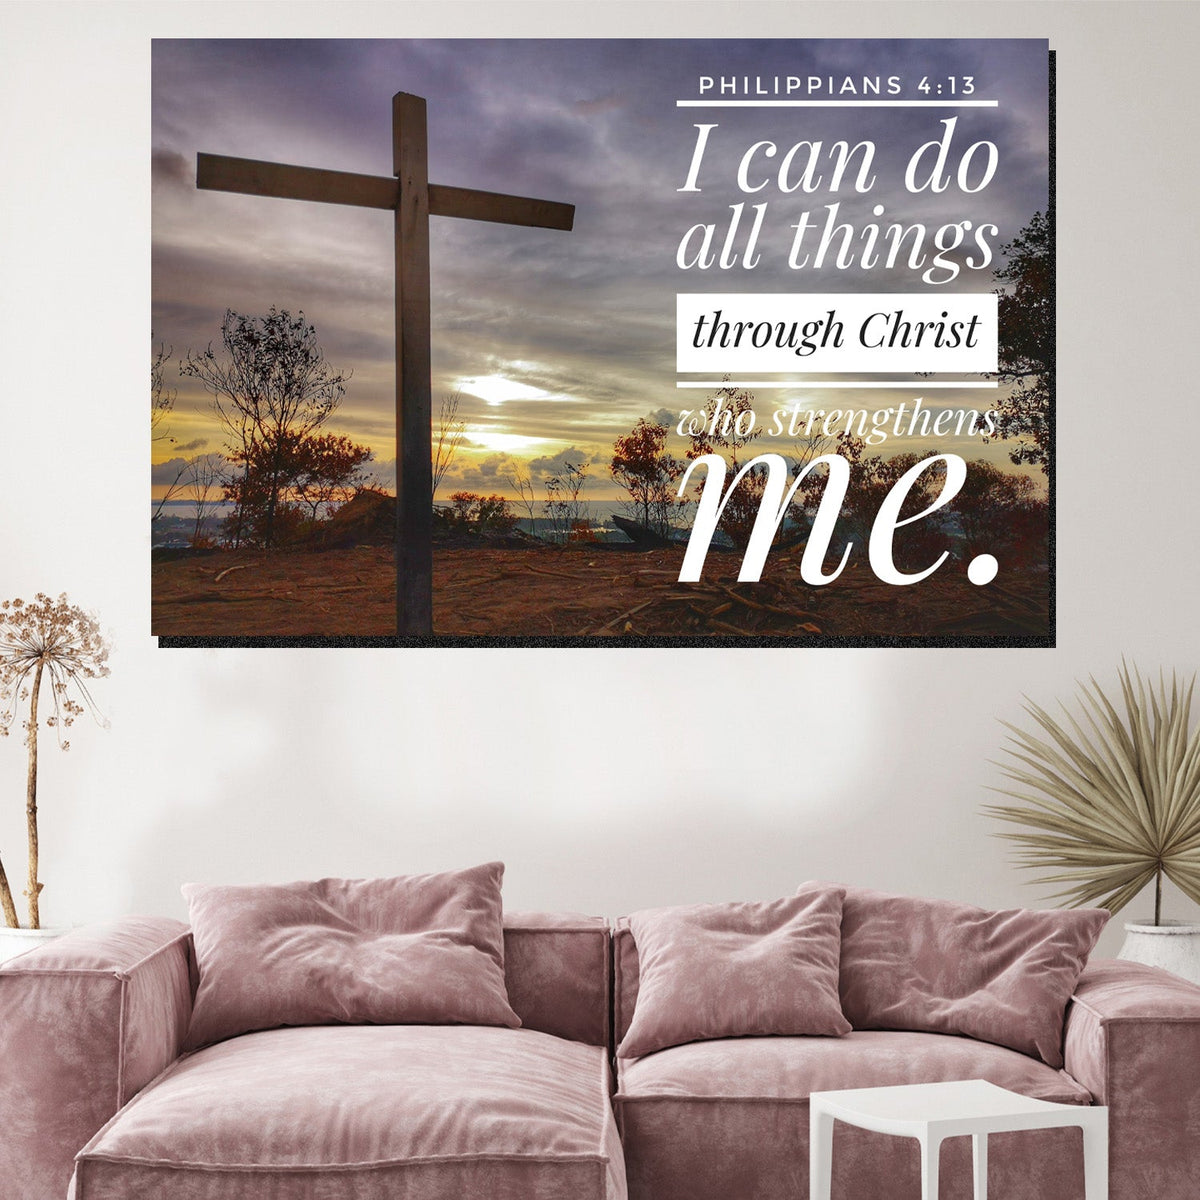 https://cdn.shopify.com/s/files/1/0387/9986/8044/products/BibleQuotePhilippians4_13CanvasArtprintStretched-4.jpg